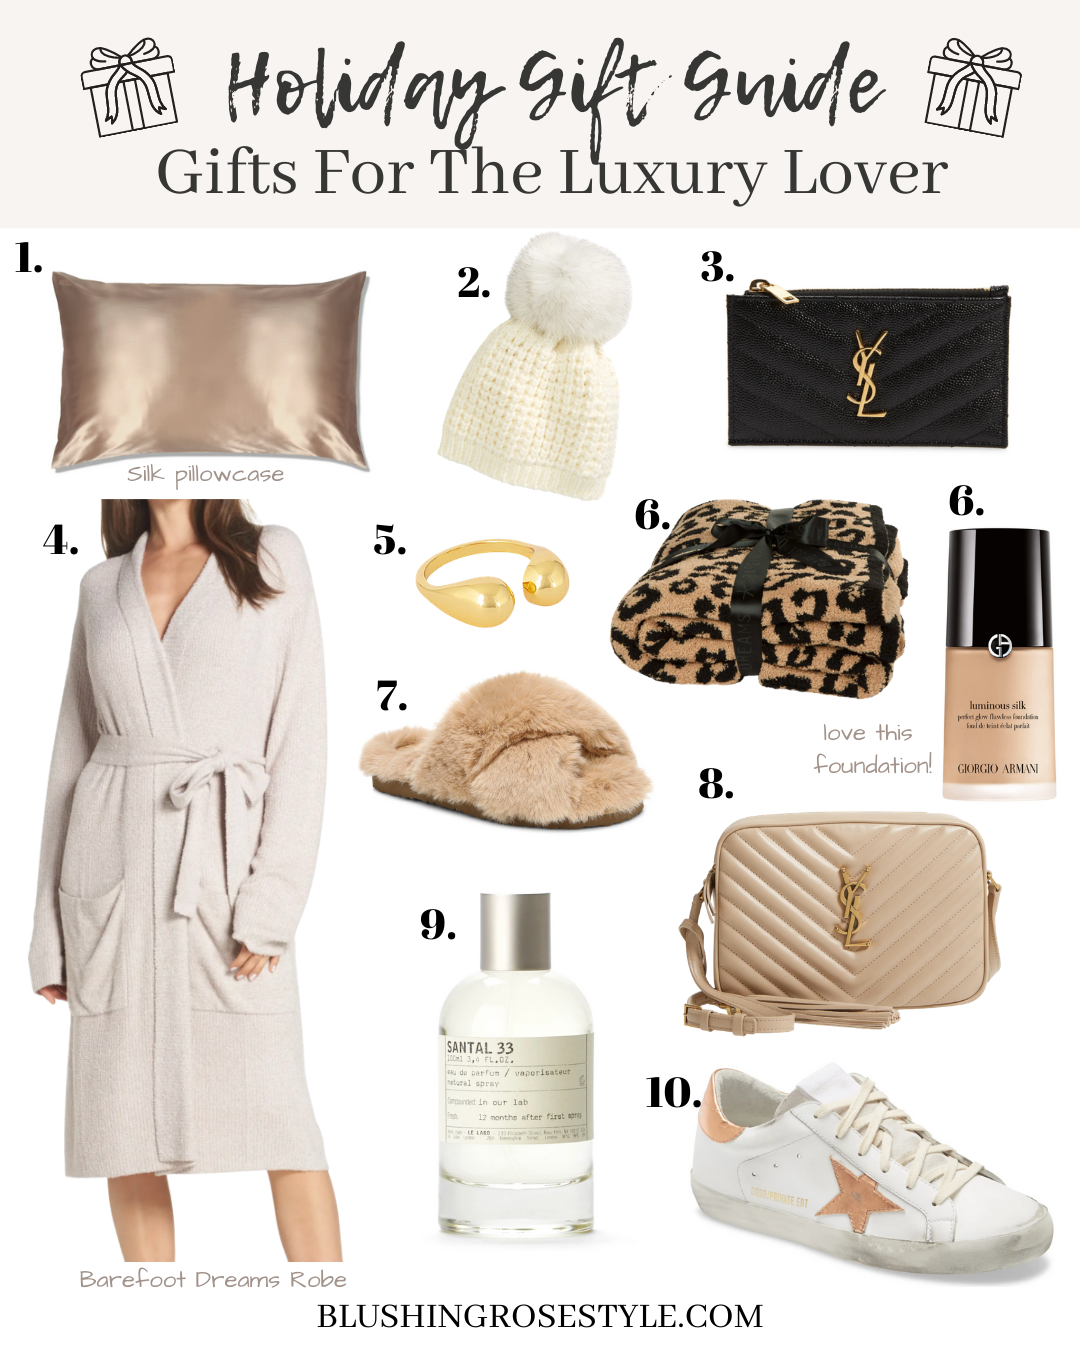 Gifts for the luxury lover